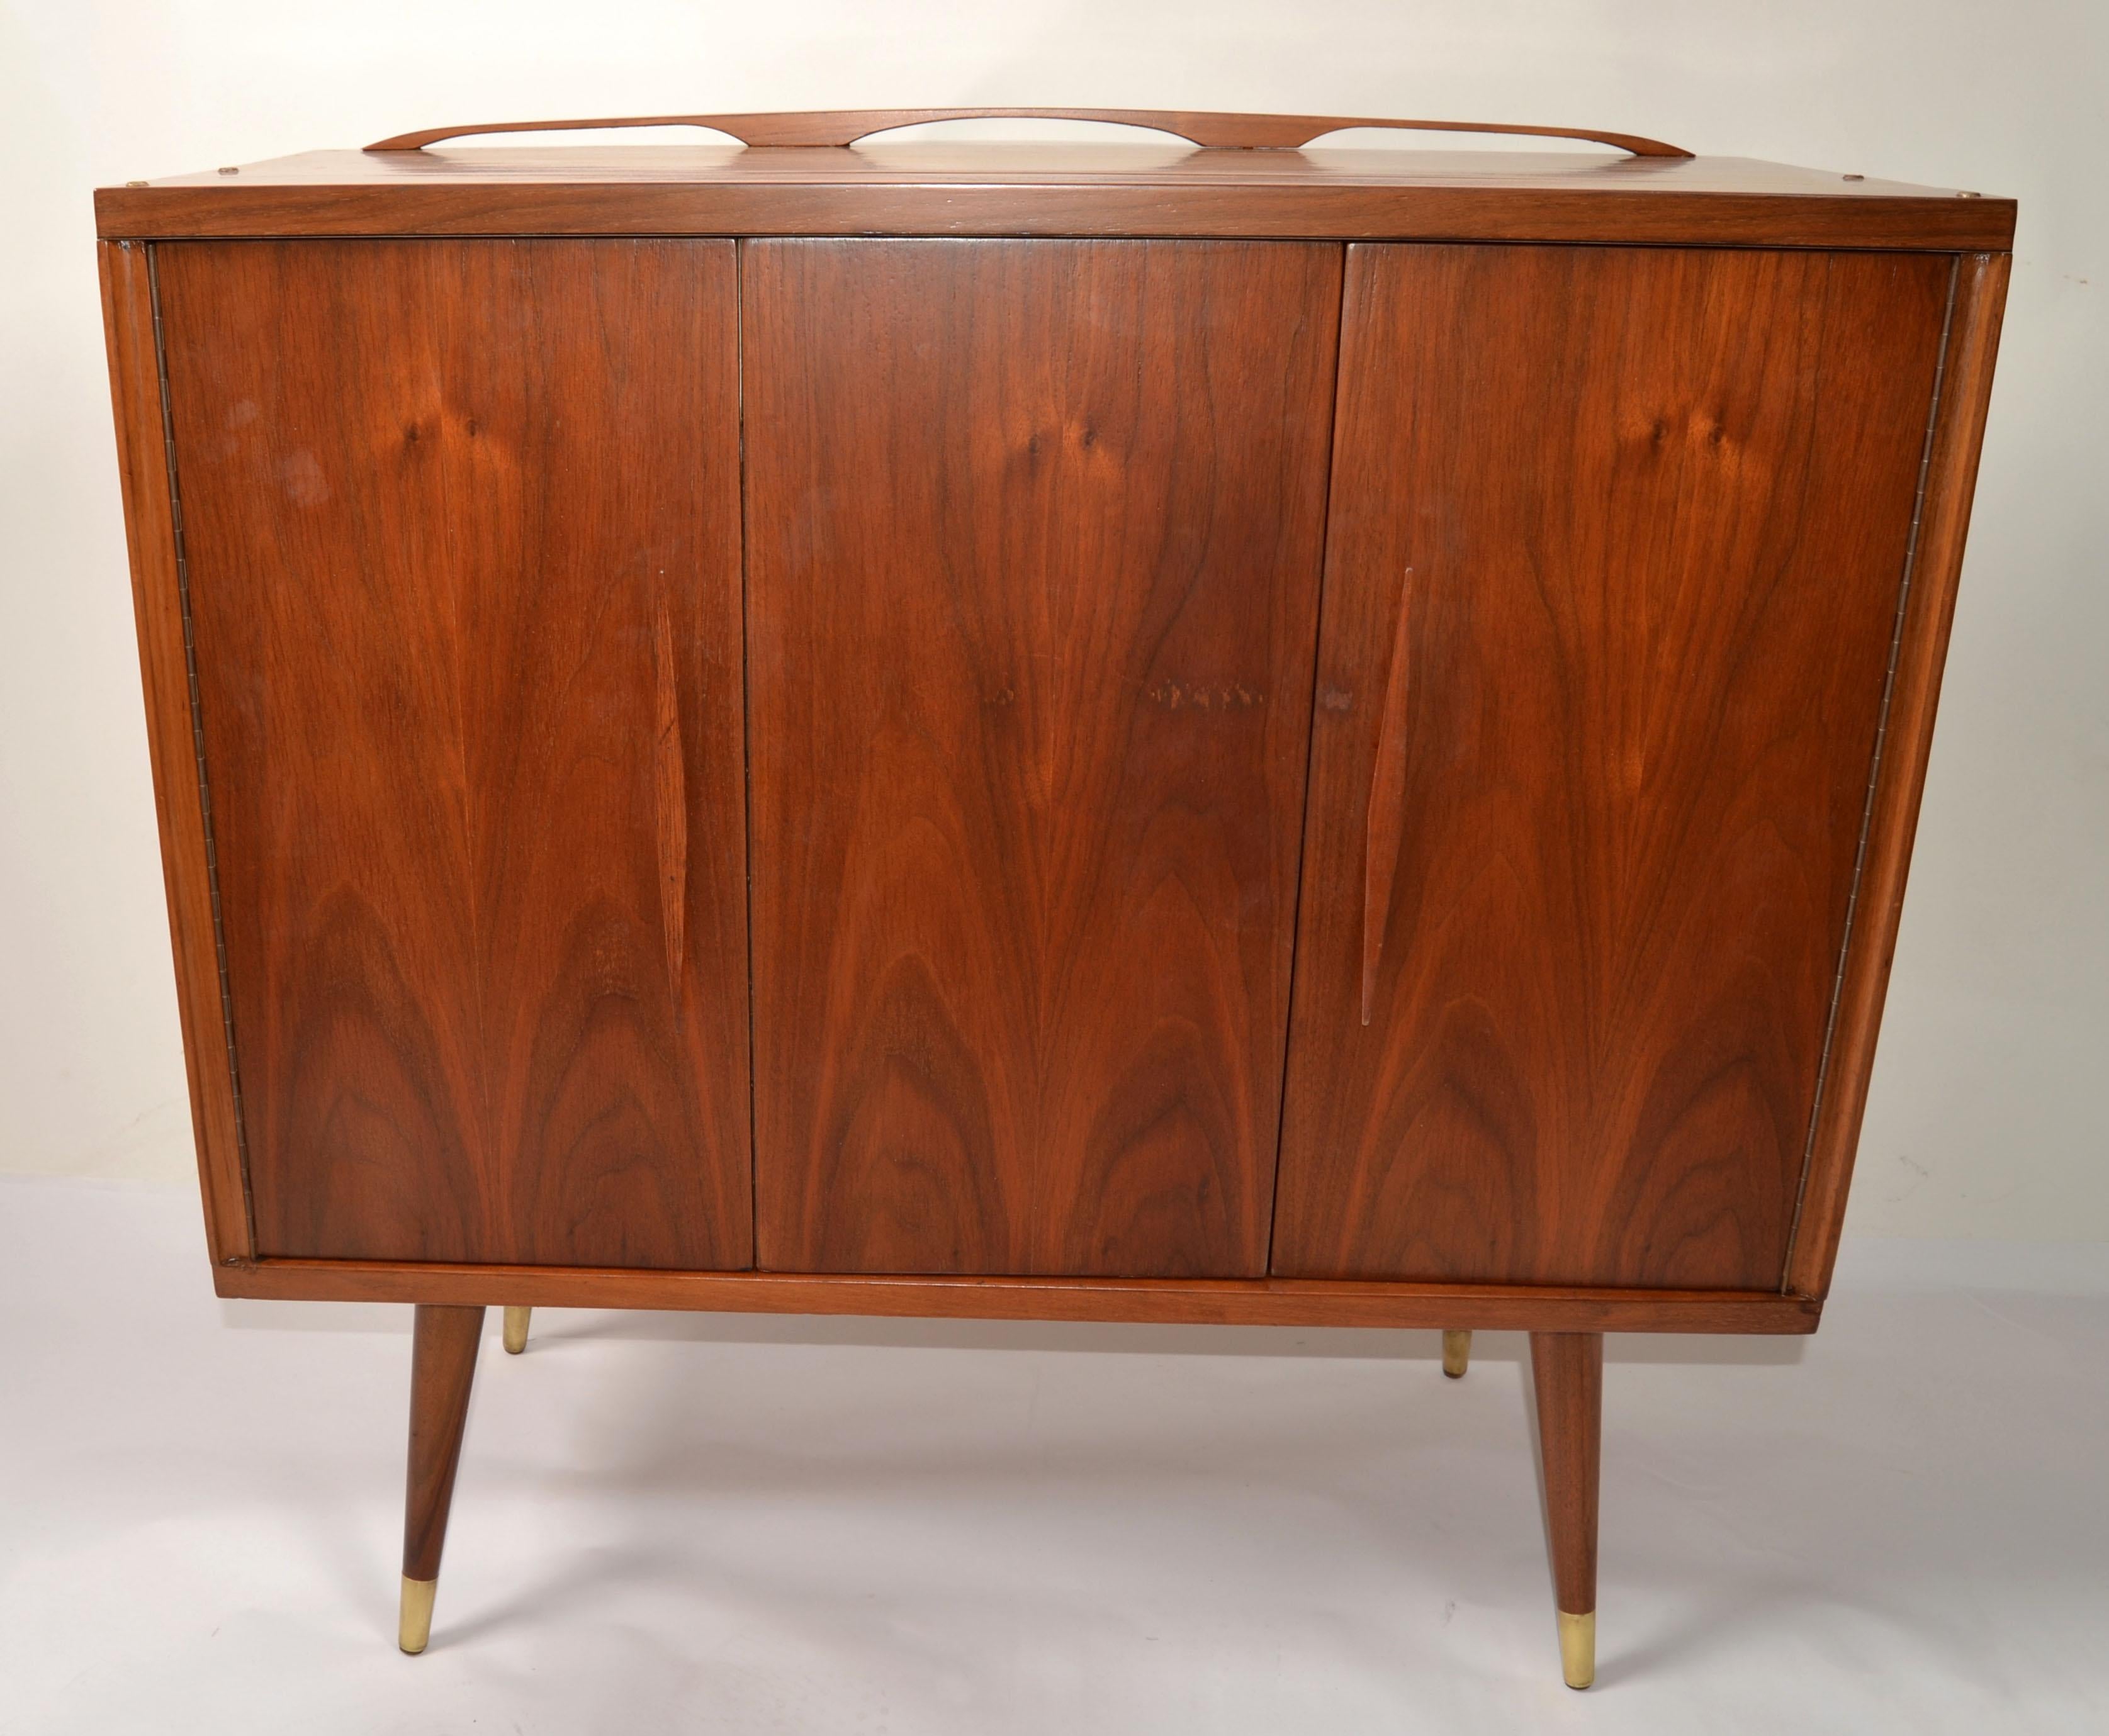 1960 Walnut Dry Bar Drinks Cabinet Pull Up Bottle Glass Top Mid-Century Modern   In Good Condition For Sale In Miami, FL